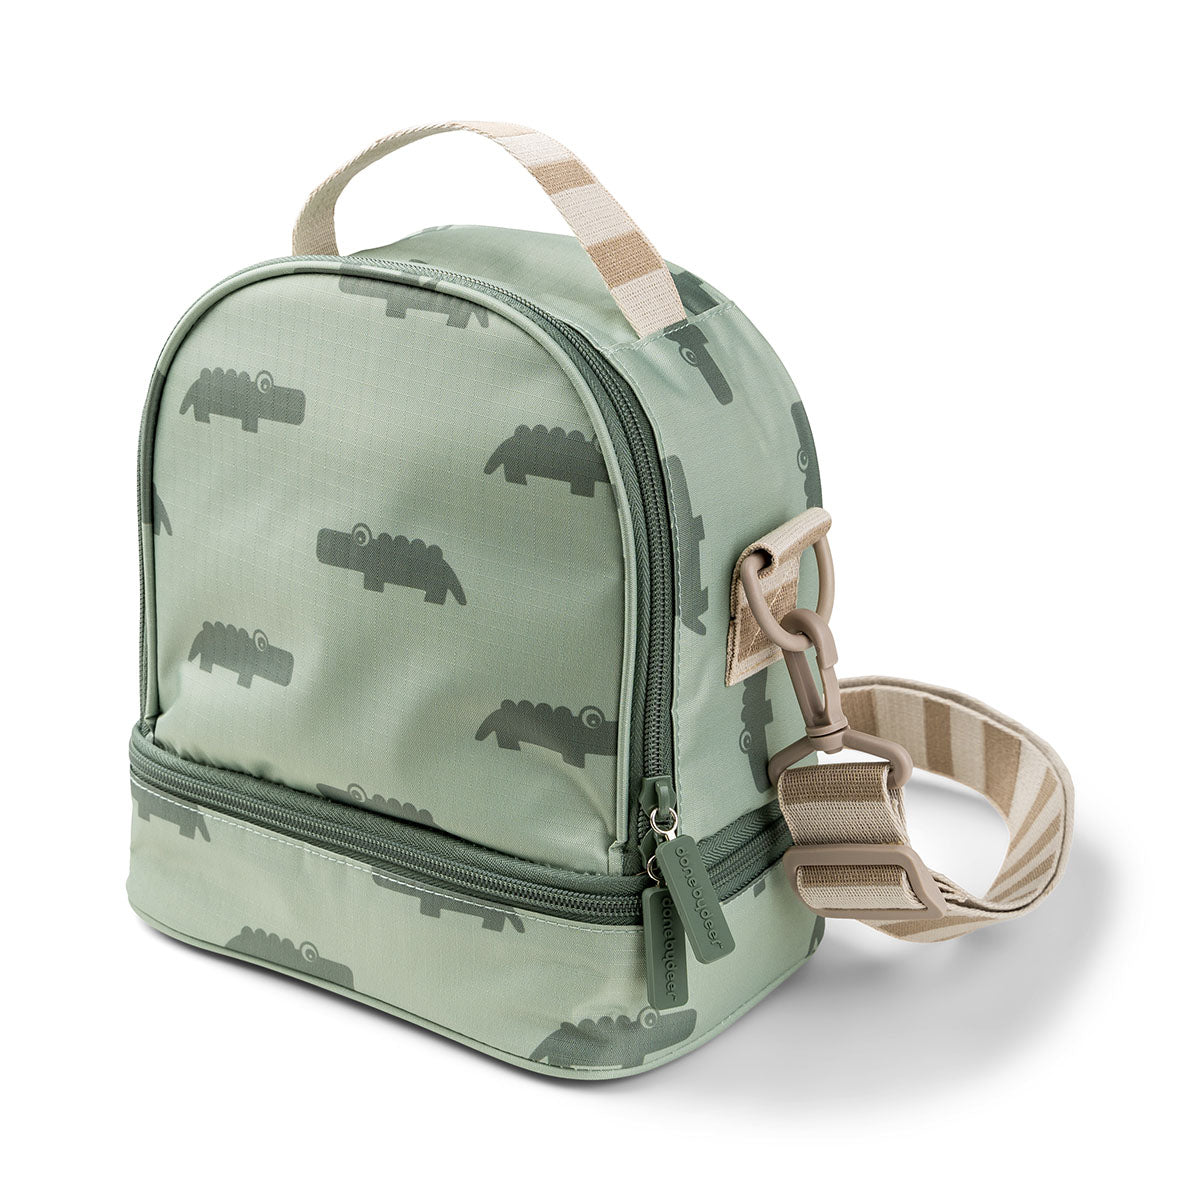 Kids insulated lunch bag - Croco - Green – Done by Deer